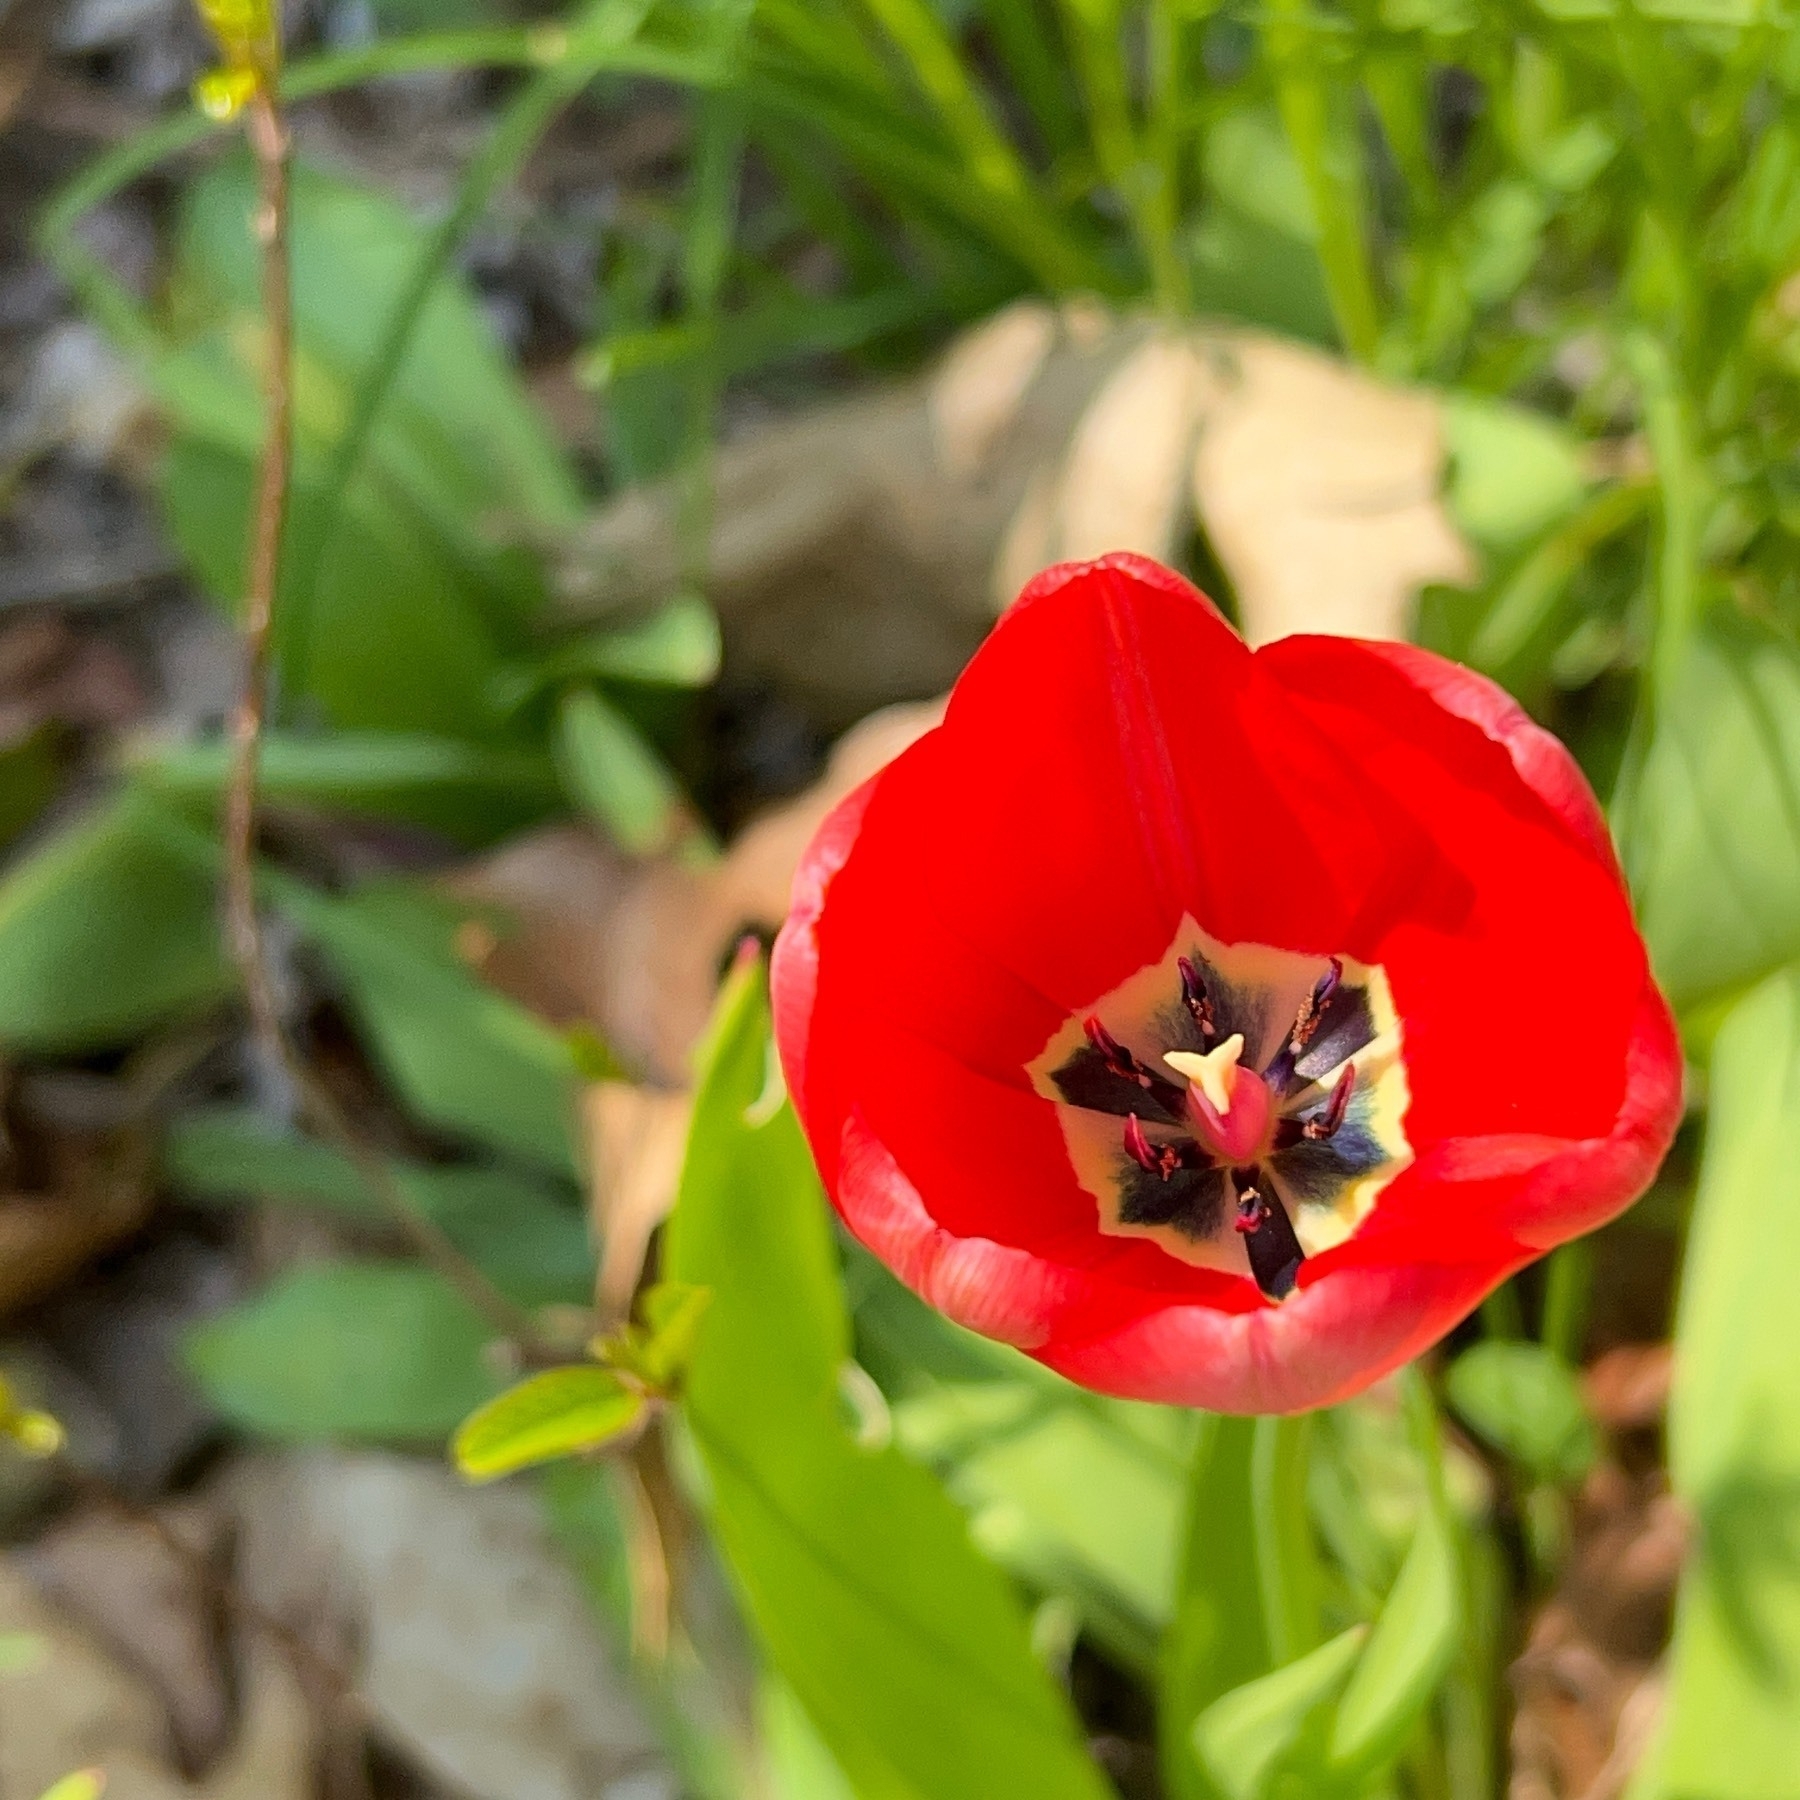 Red tulip viewed from above.